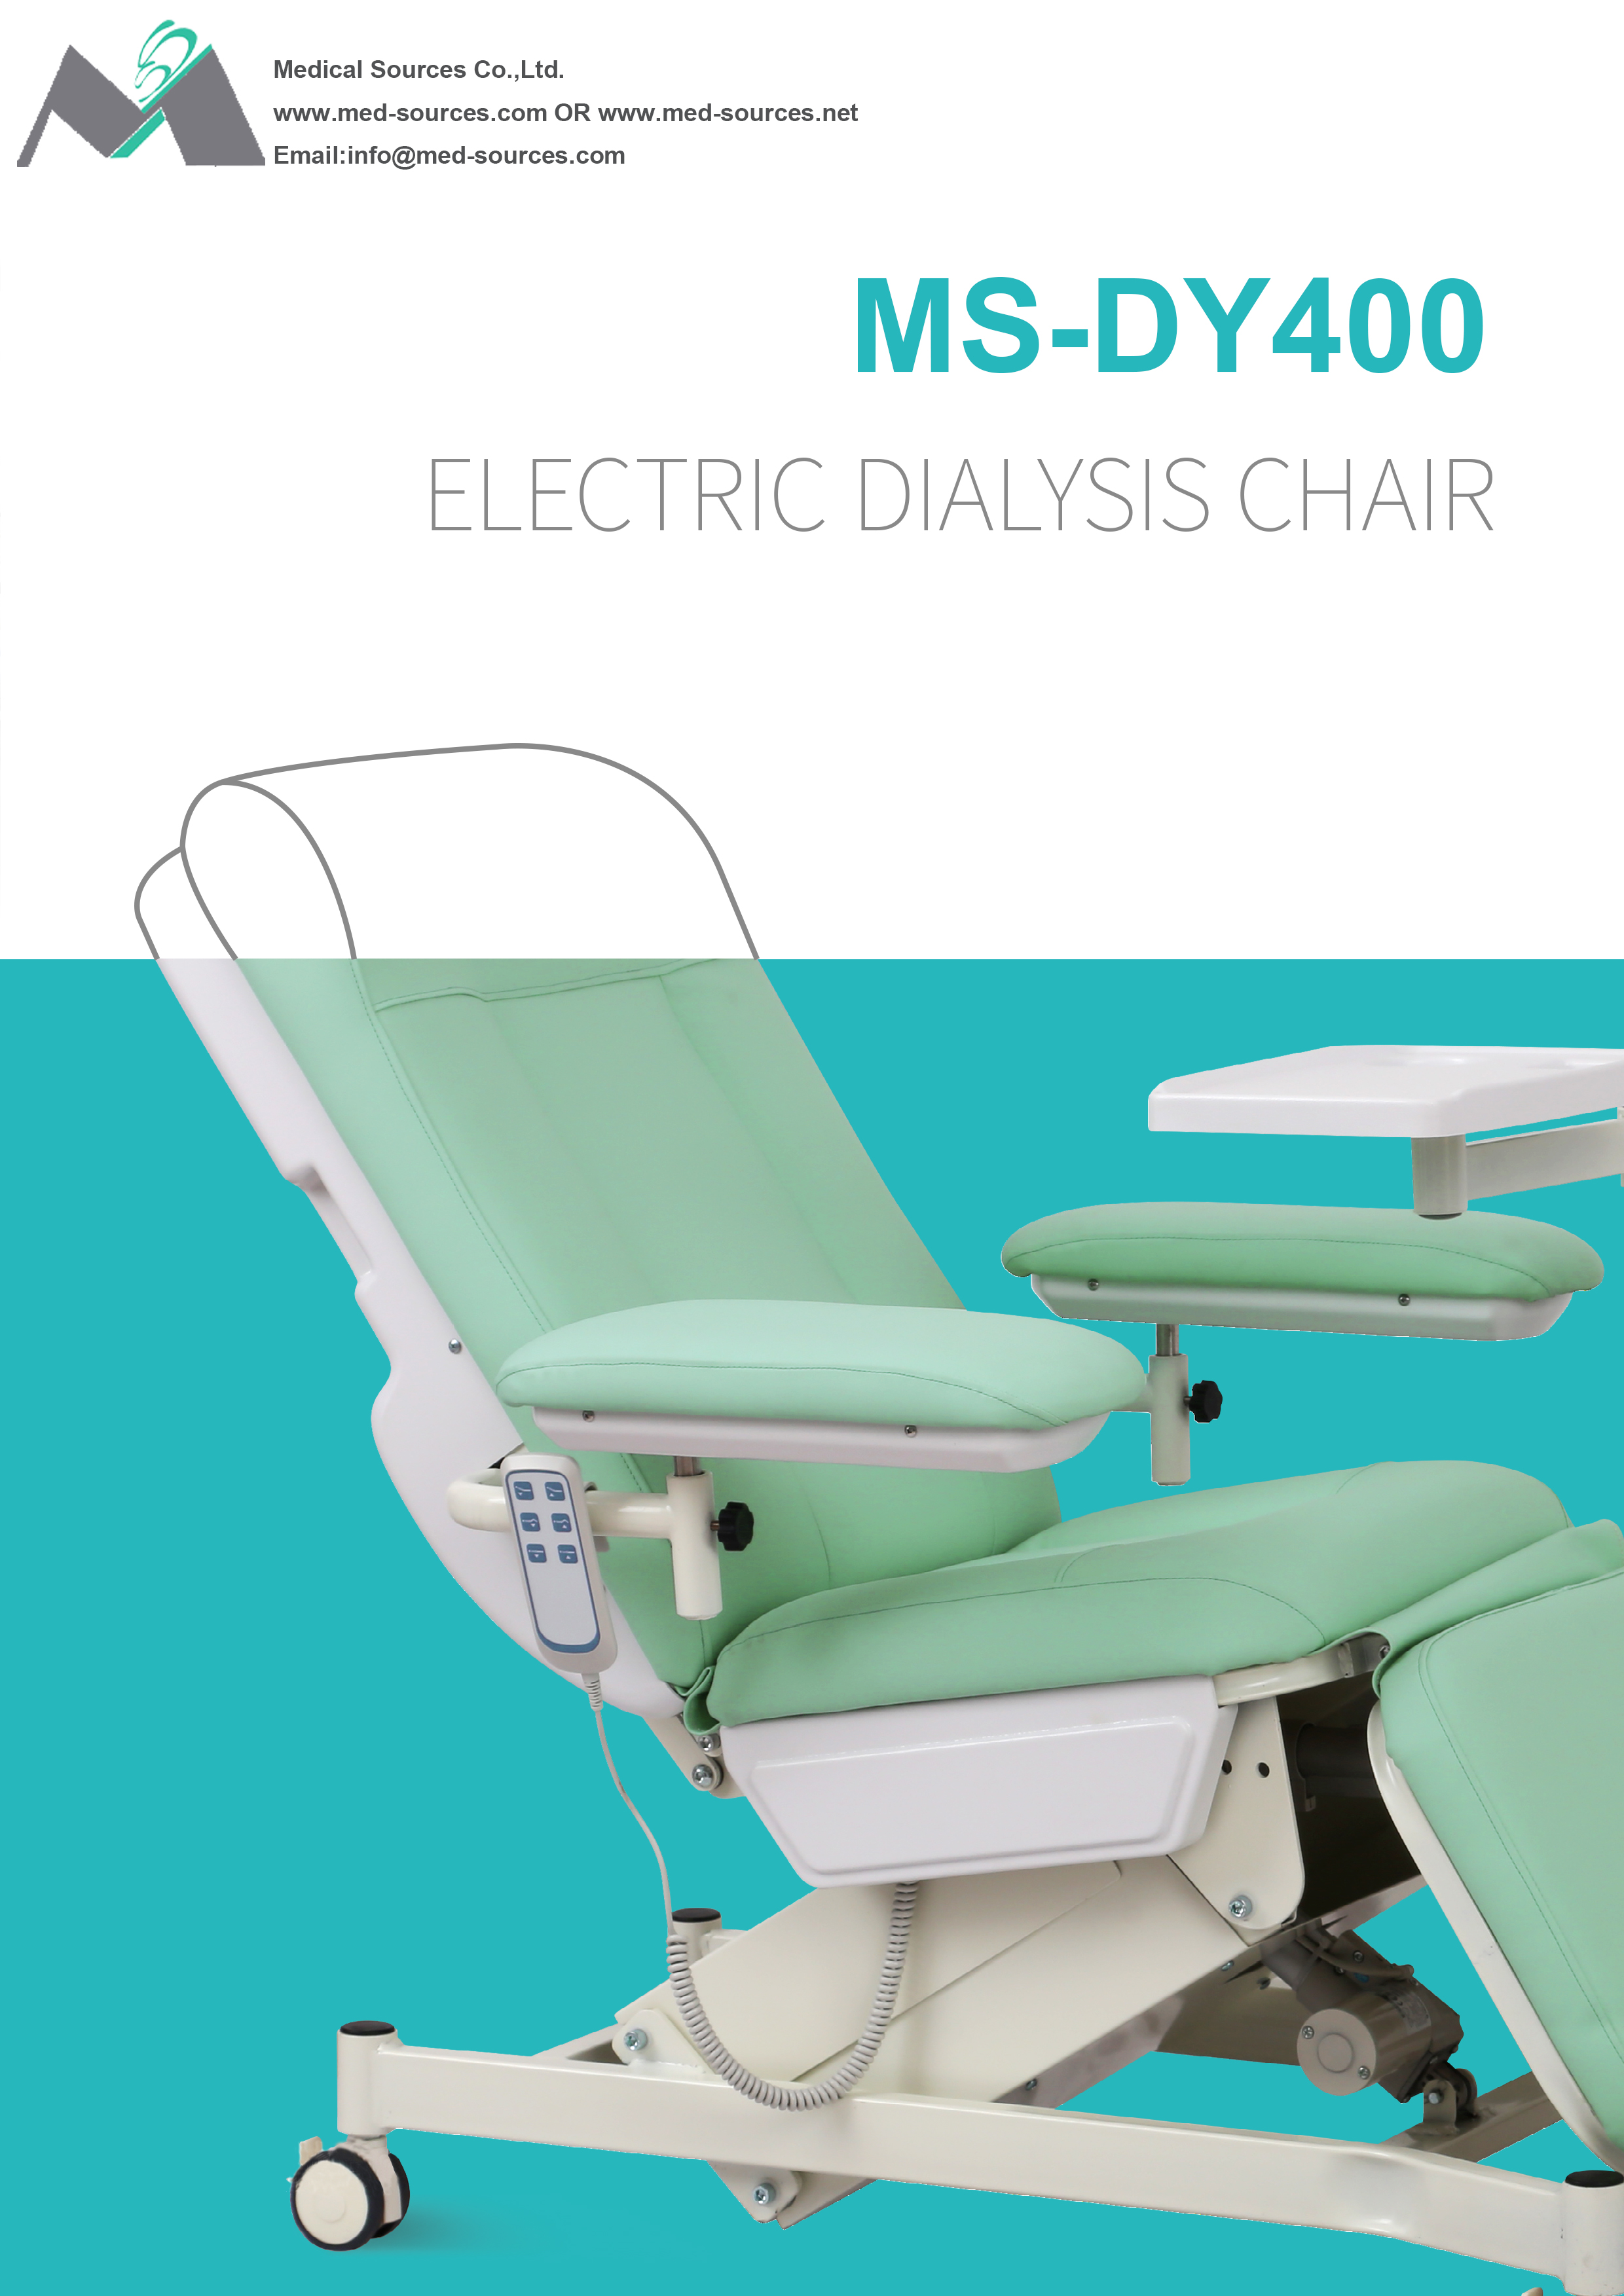 MS-DY400 Electric Dialysis Chair-1